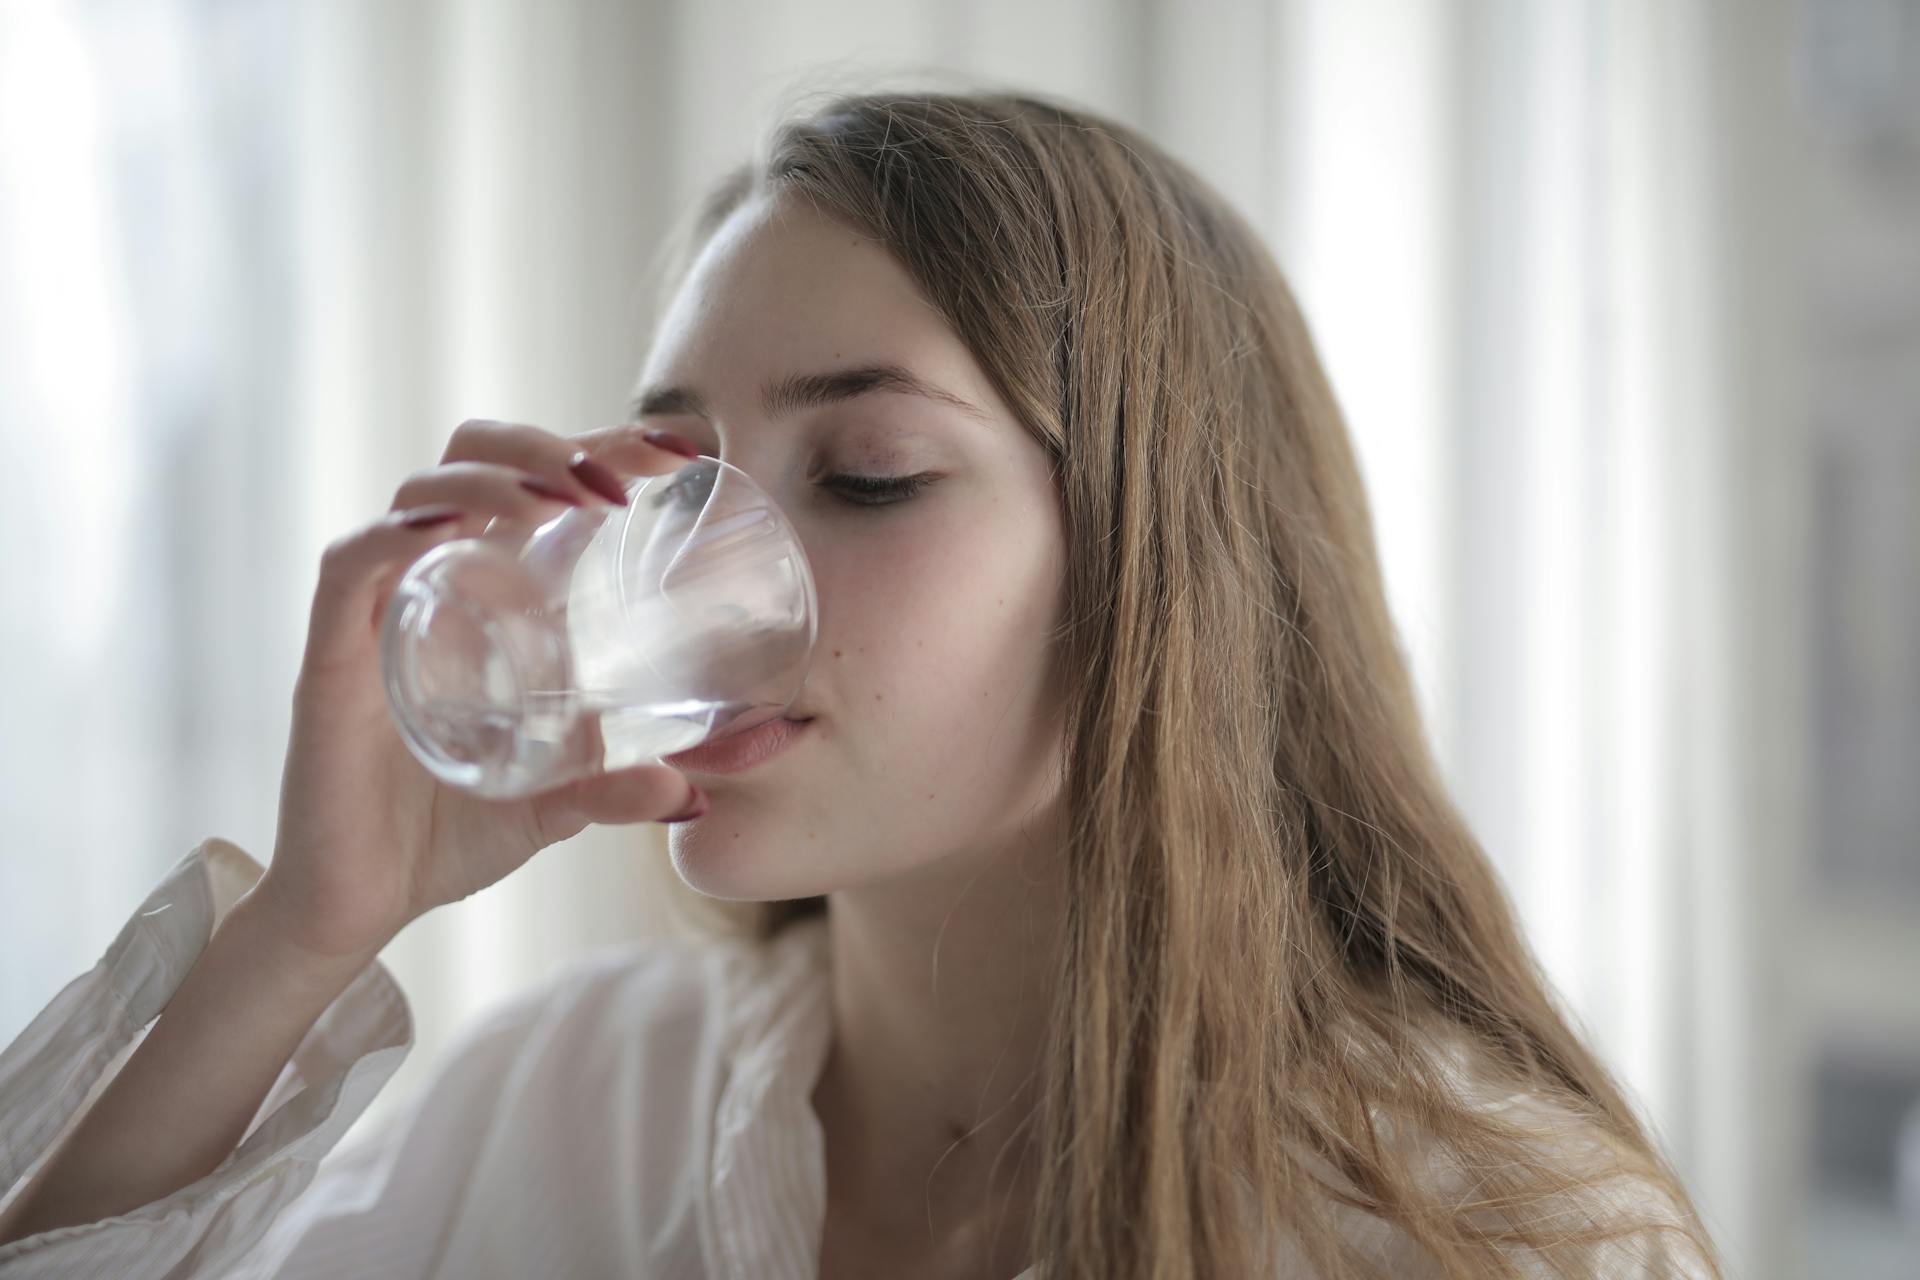 A woman drinking water | Source: Pexels